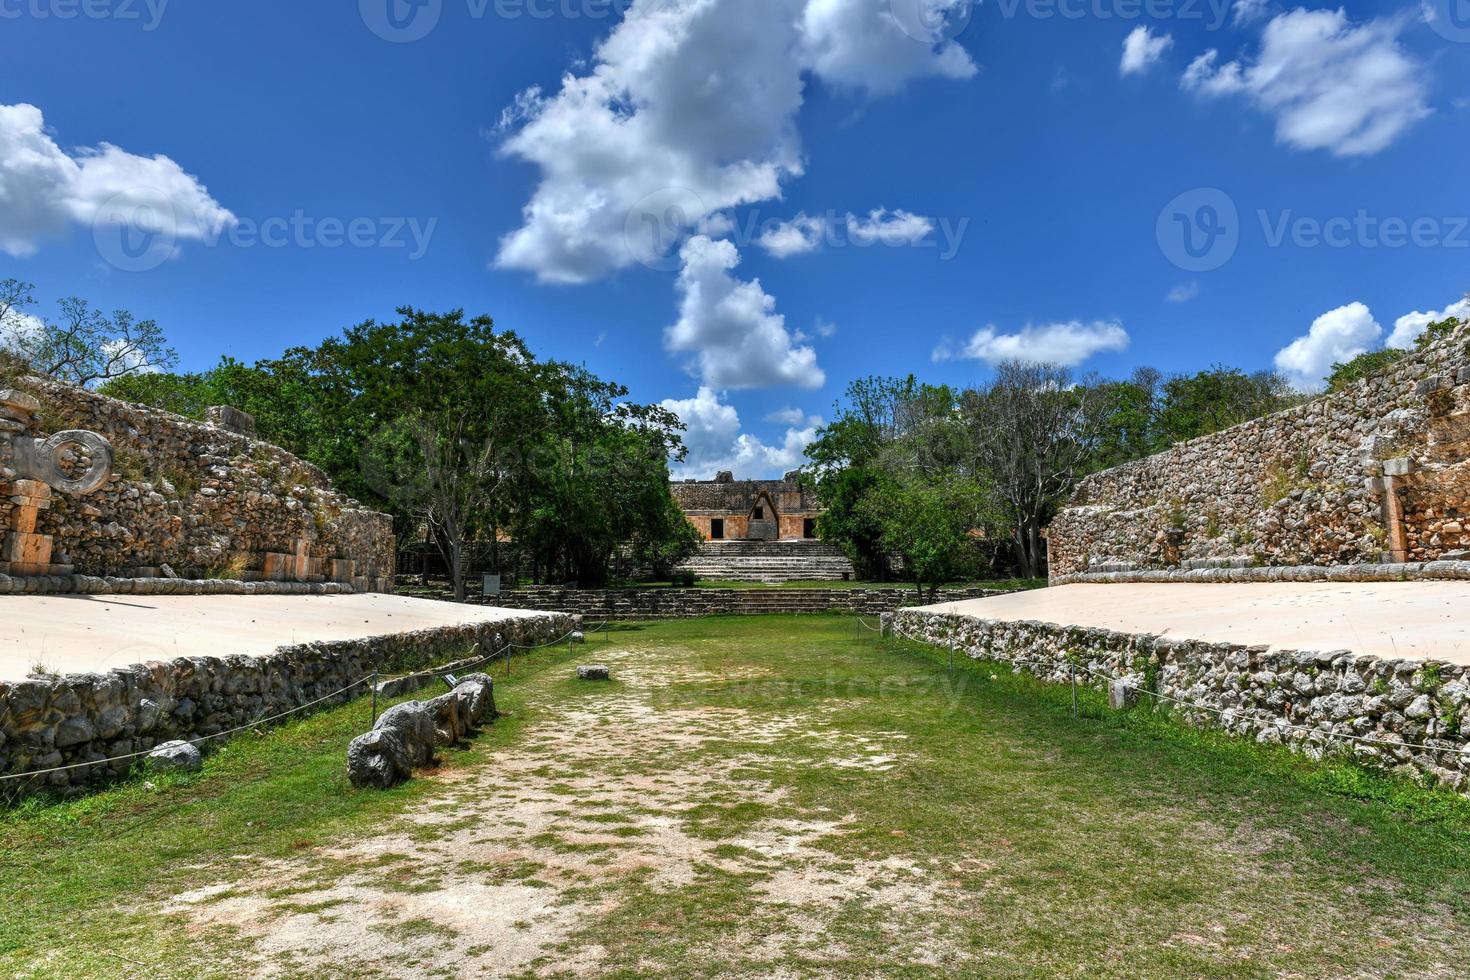 Ball court on the territory of the Uxmal archeological and historical site, ancient city, representative of the Puuc architectural style in Yucatan, Mexico. photo